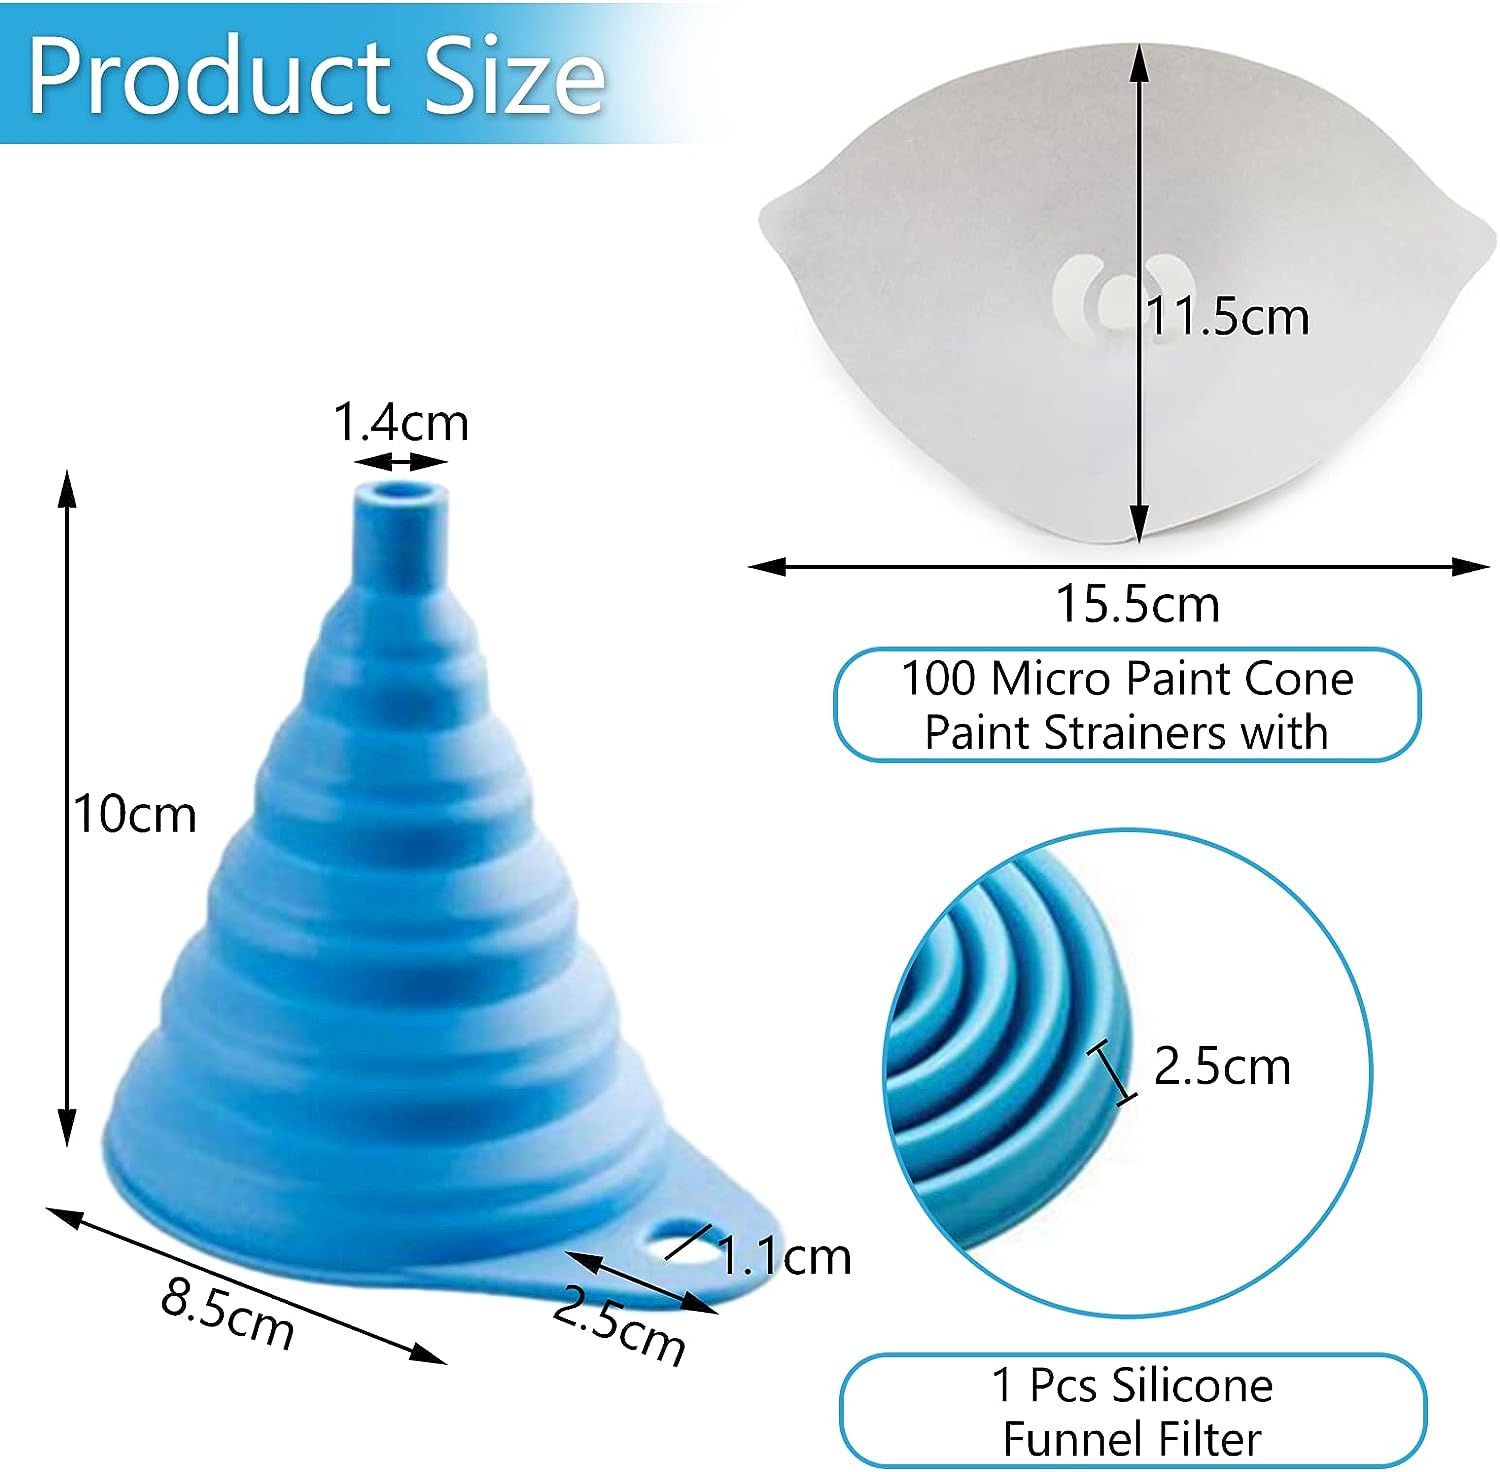 Paint Filter Strainer Resin Filter with 100 Micro Paint Cone Paint Strainers with 1 Pcs Silicone Funnel Filter-100 pcs